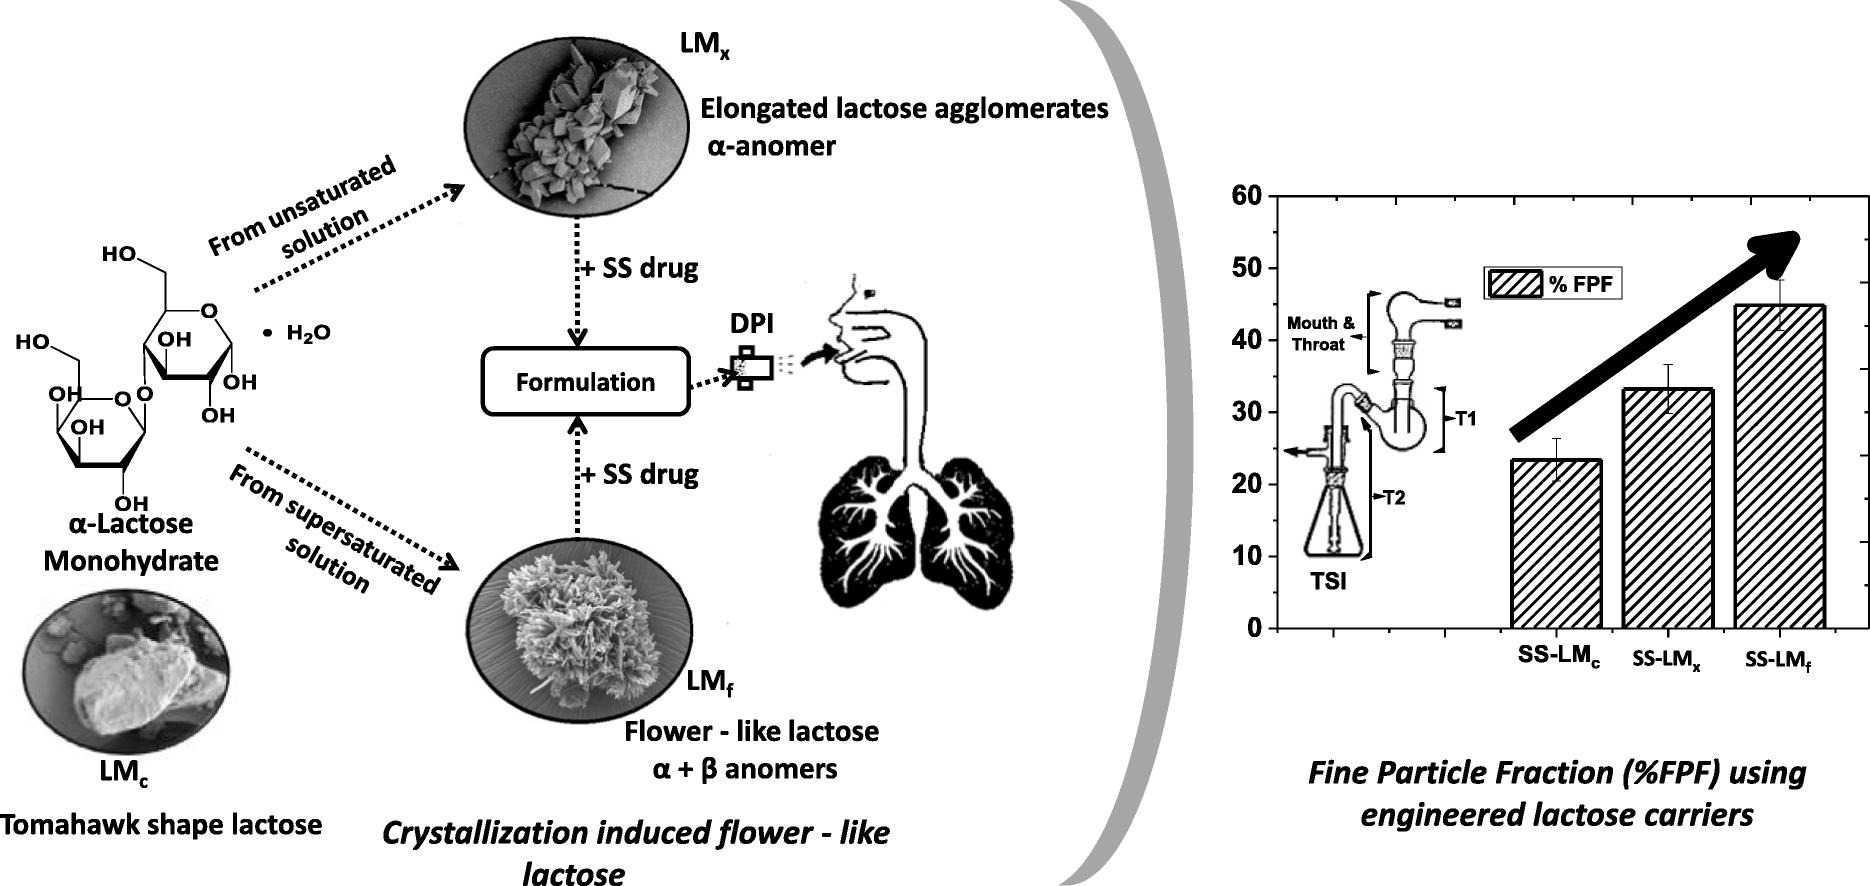 Crystallization induced flower-like lactose as potential carriers for dry powder inhaler application